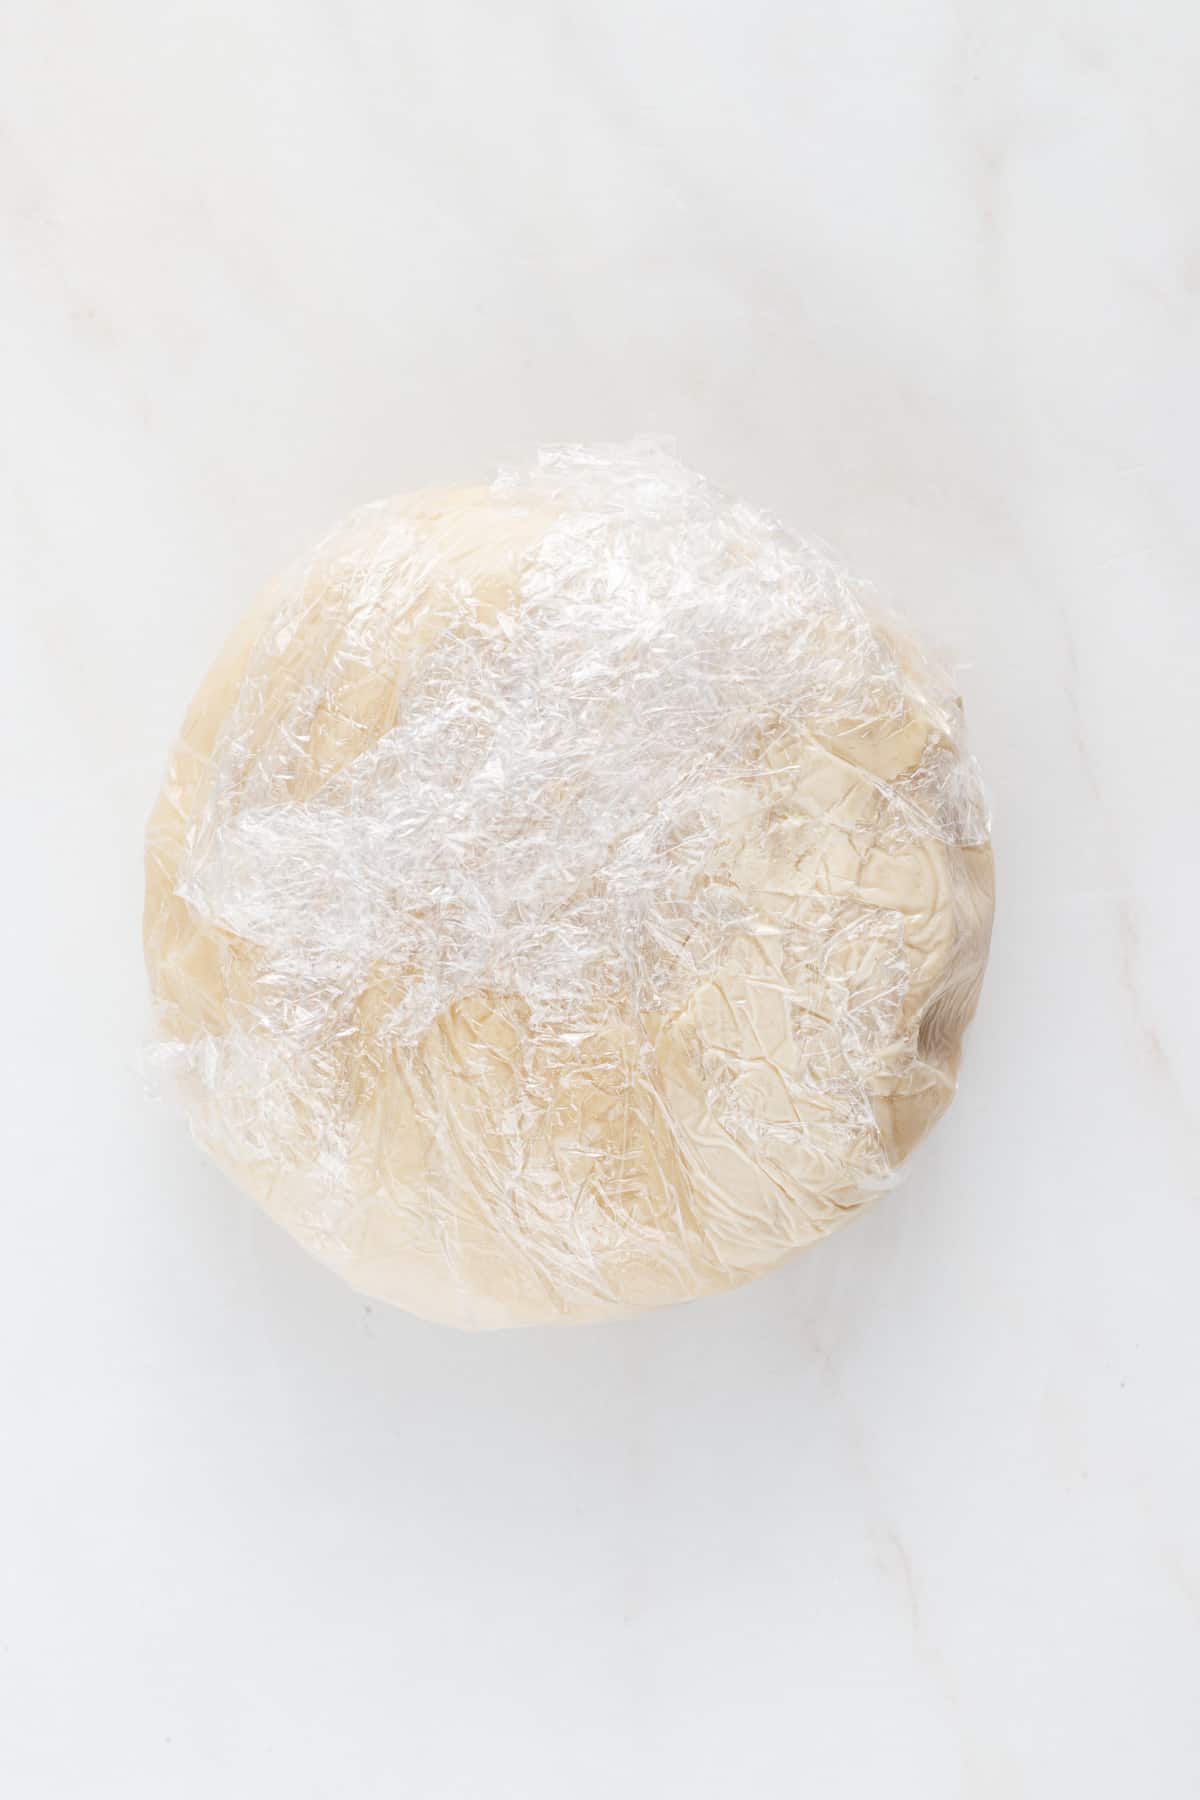 Homemade dairy-free pie crust dough rolled into a disc and covered in plastic wrap.